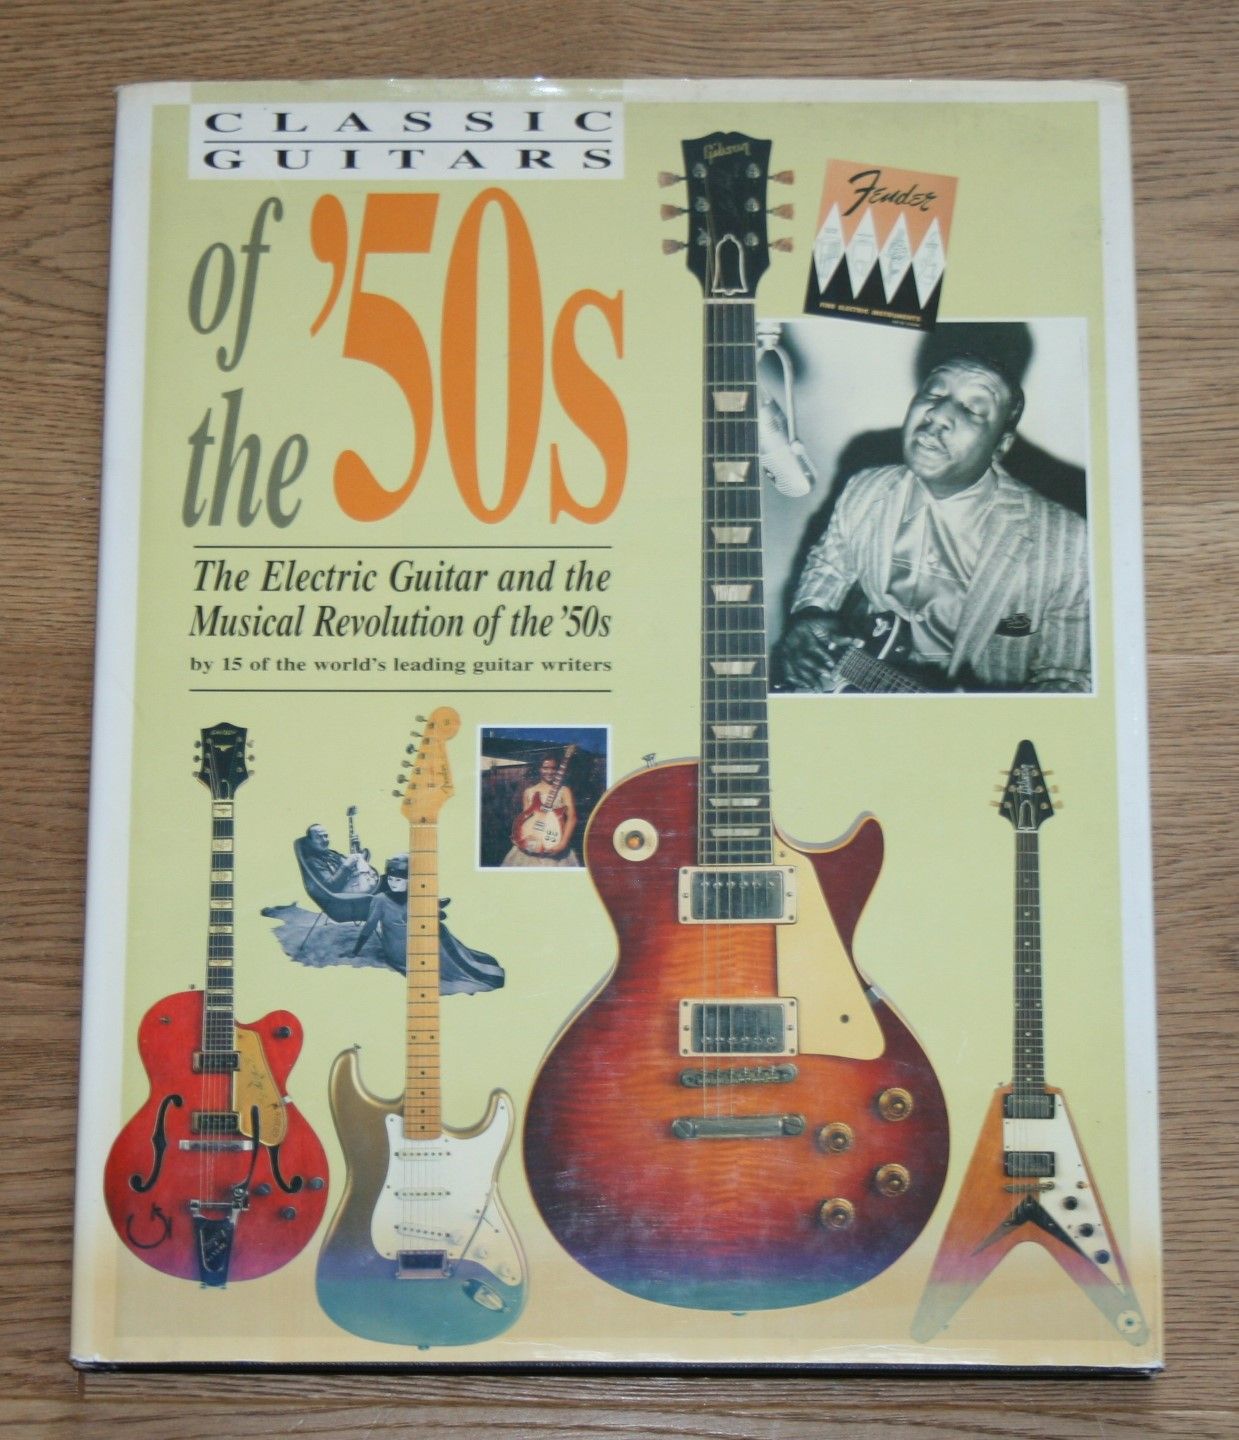 Classic Guitars of the '50s: The Electric Guitar and the Musical Revolution of the ´50s. - Alexander, Charles, Tony Bacon and Dave Burrluck